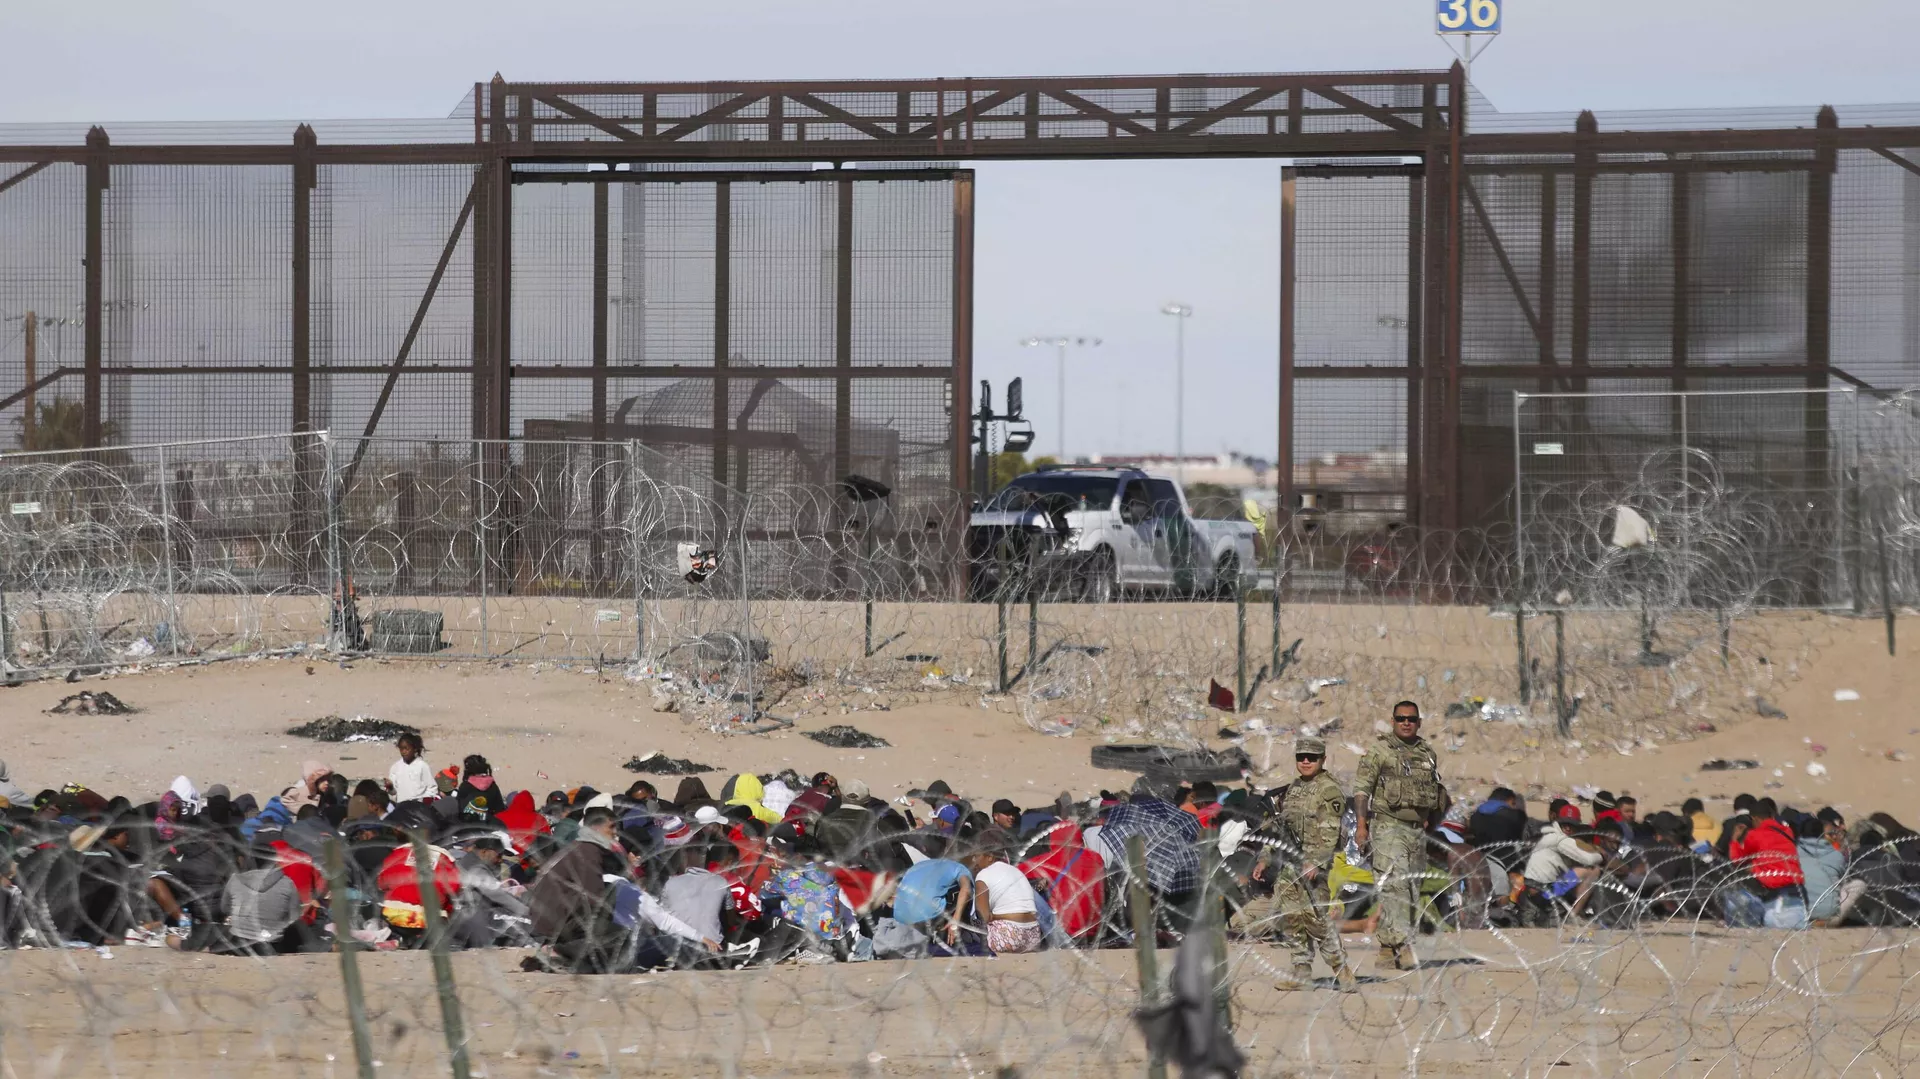 26 Republican State Attorneys General Pledge Support for Texas’ Border Stance – Report